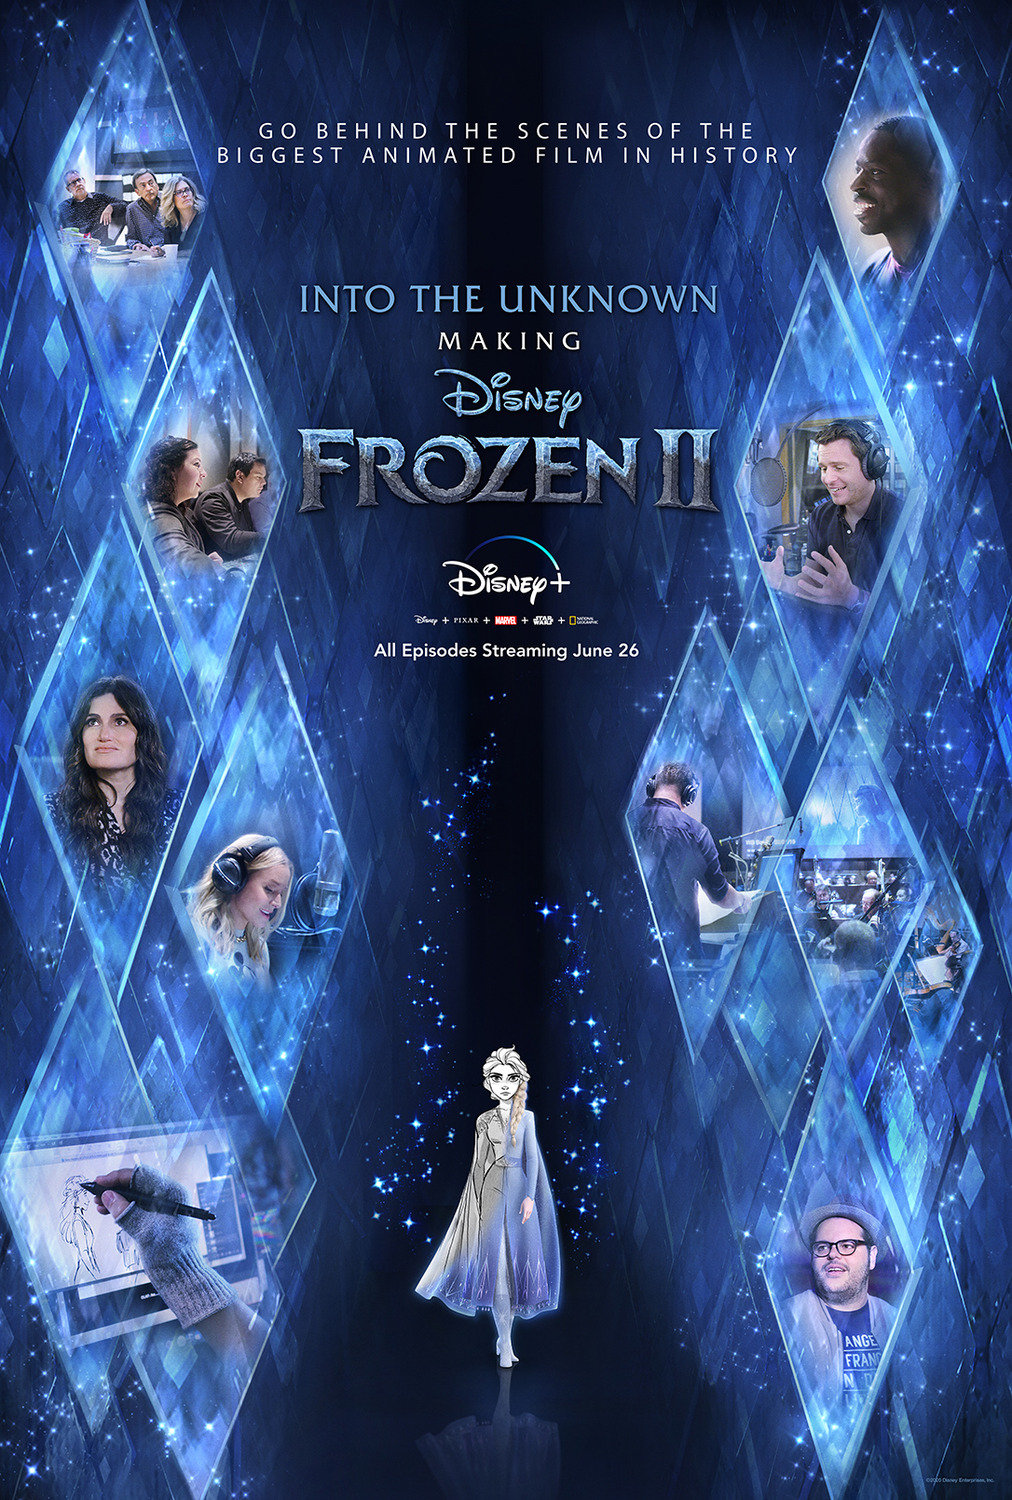 Extra Large TV Poster Image for Into the Unknown: Making Frozen 2 